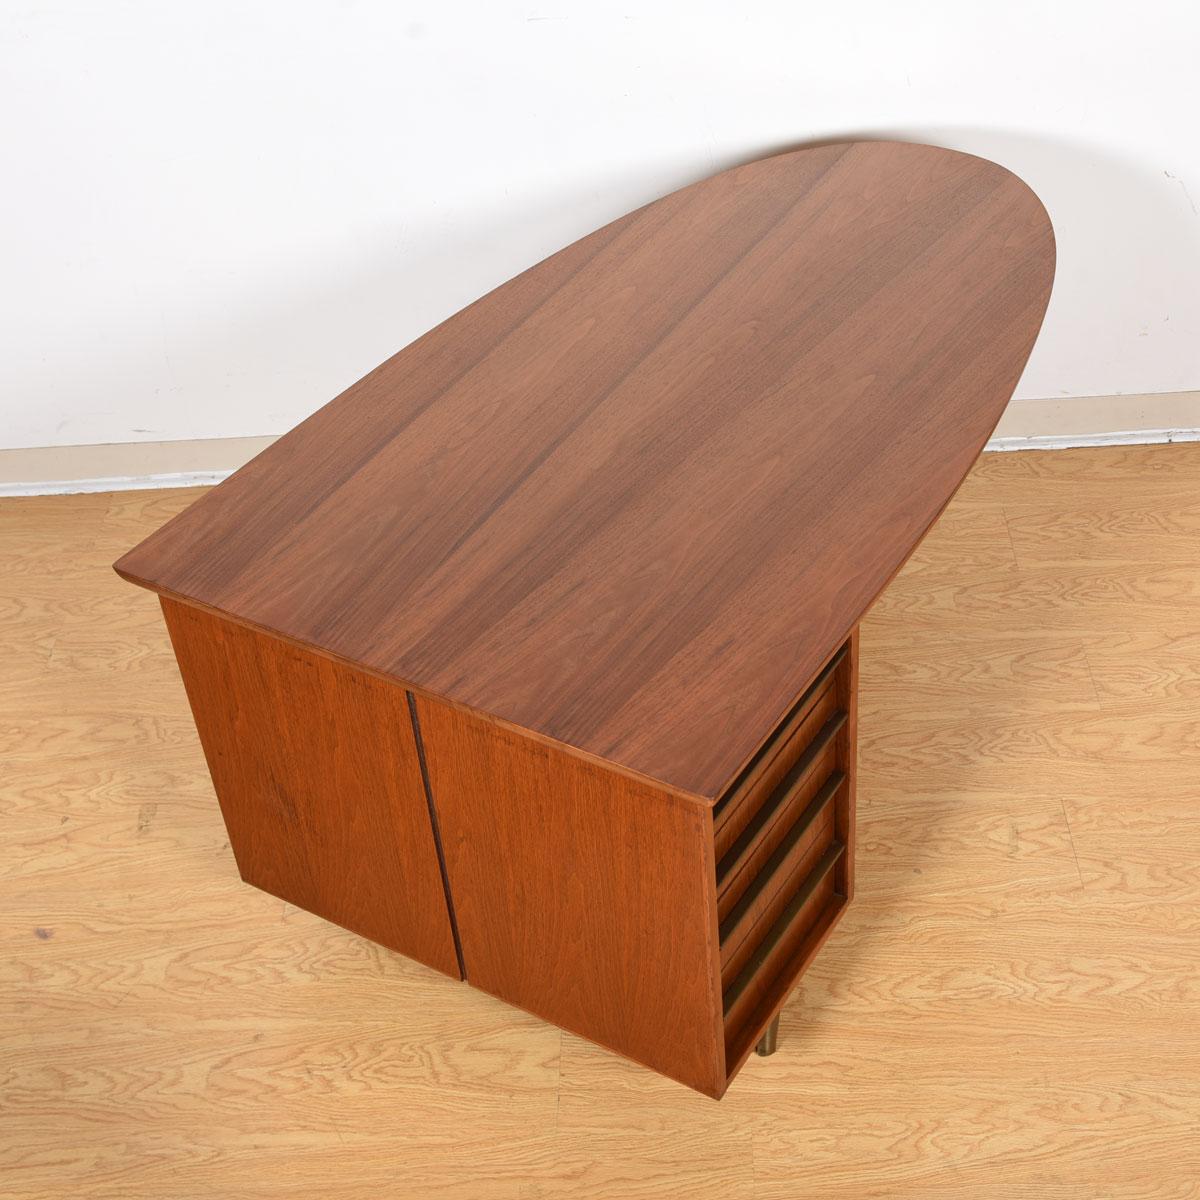 Unique Ovoid Walnut Desk with 3 Drawers In Excellent Condition For Sale In Kensington, MD